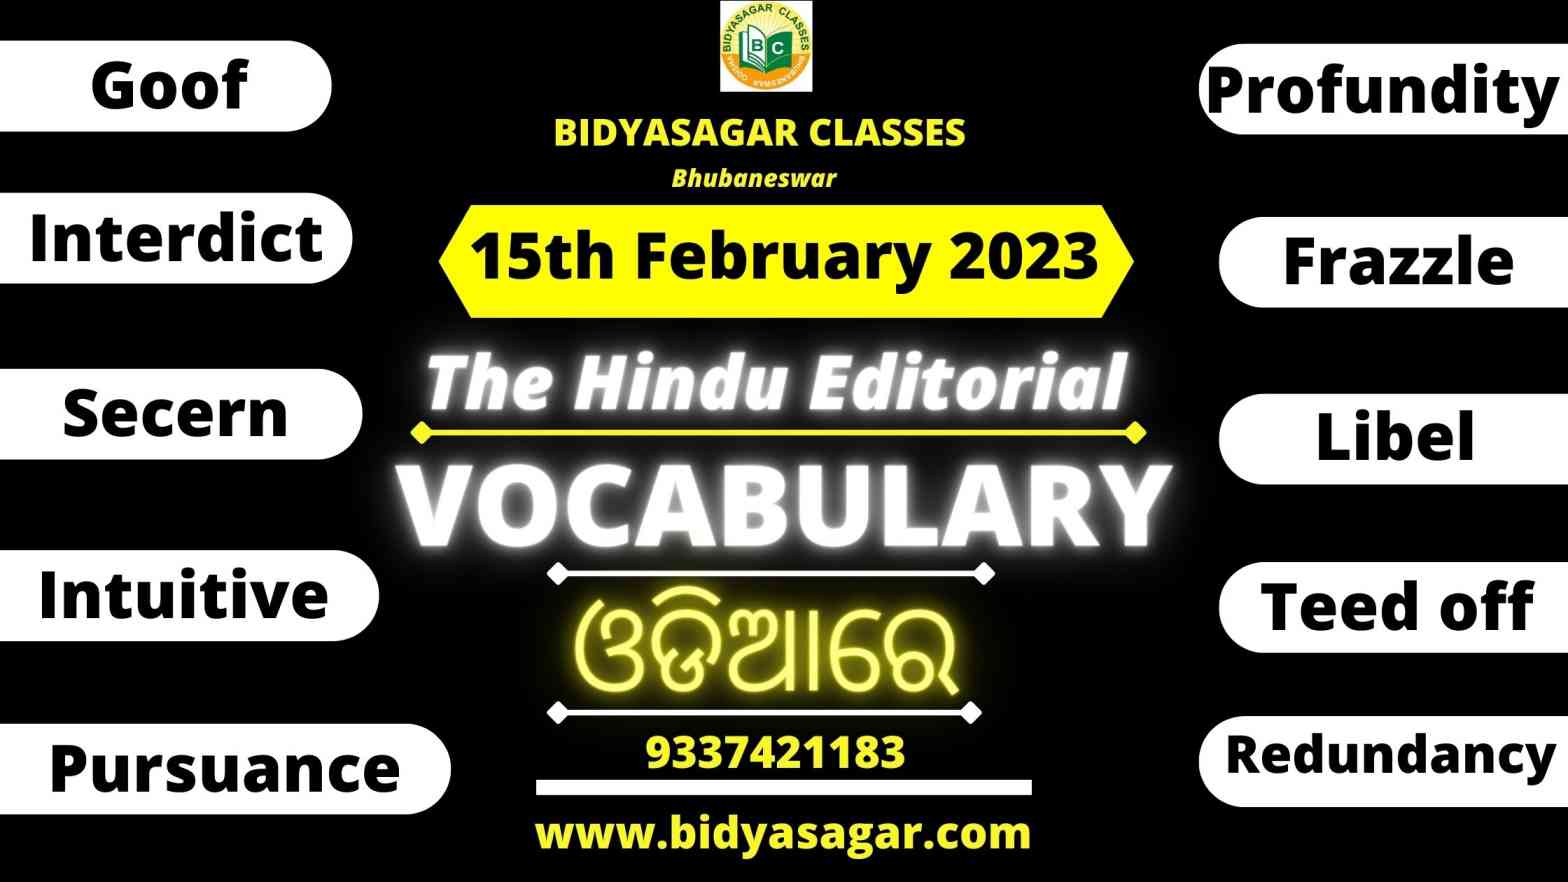 The Hindu Editorial Vocabulary of 15th February 2023